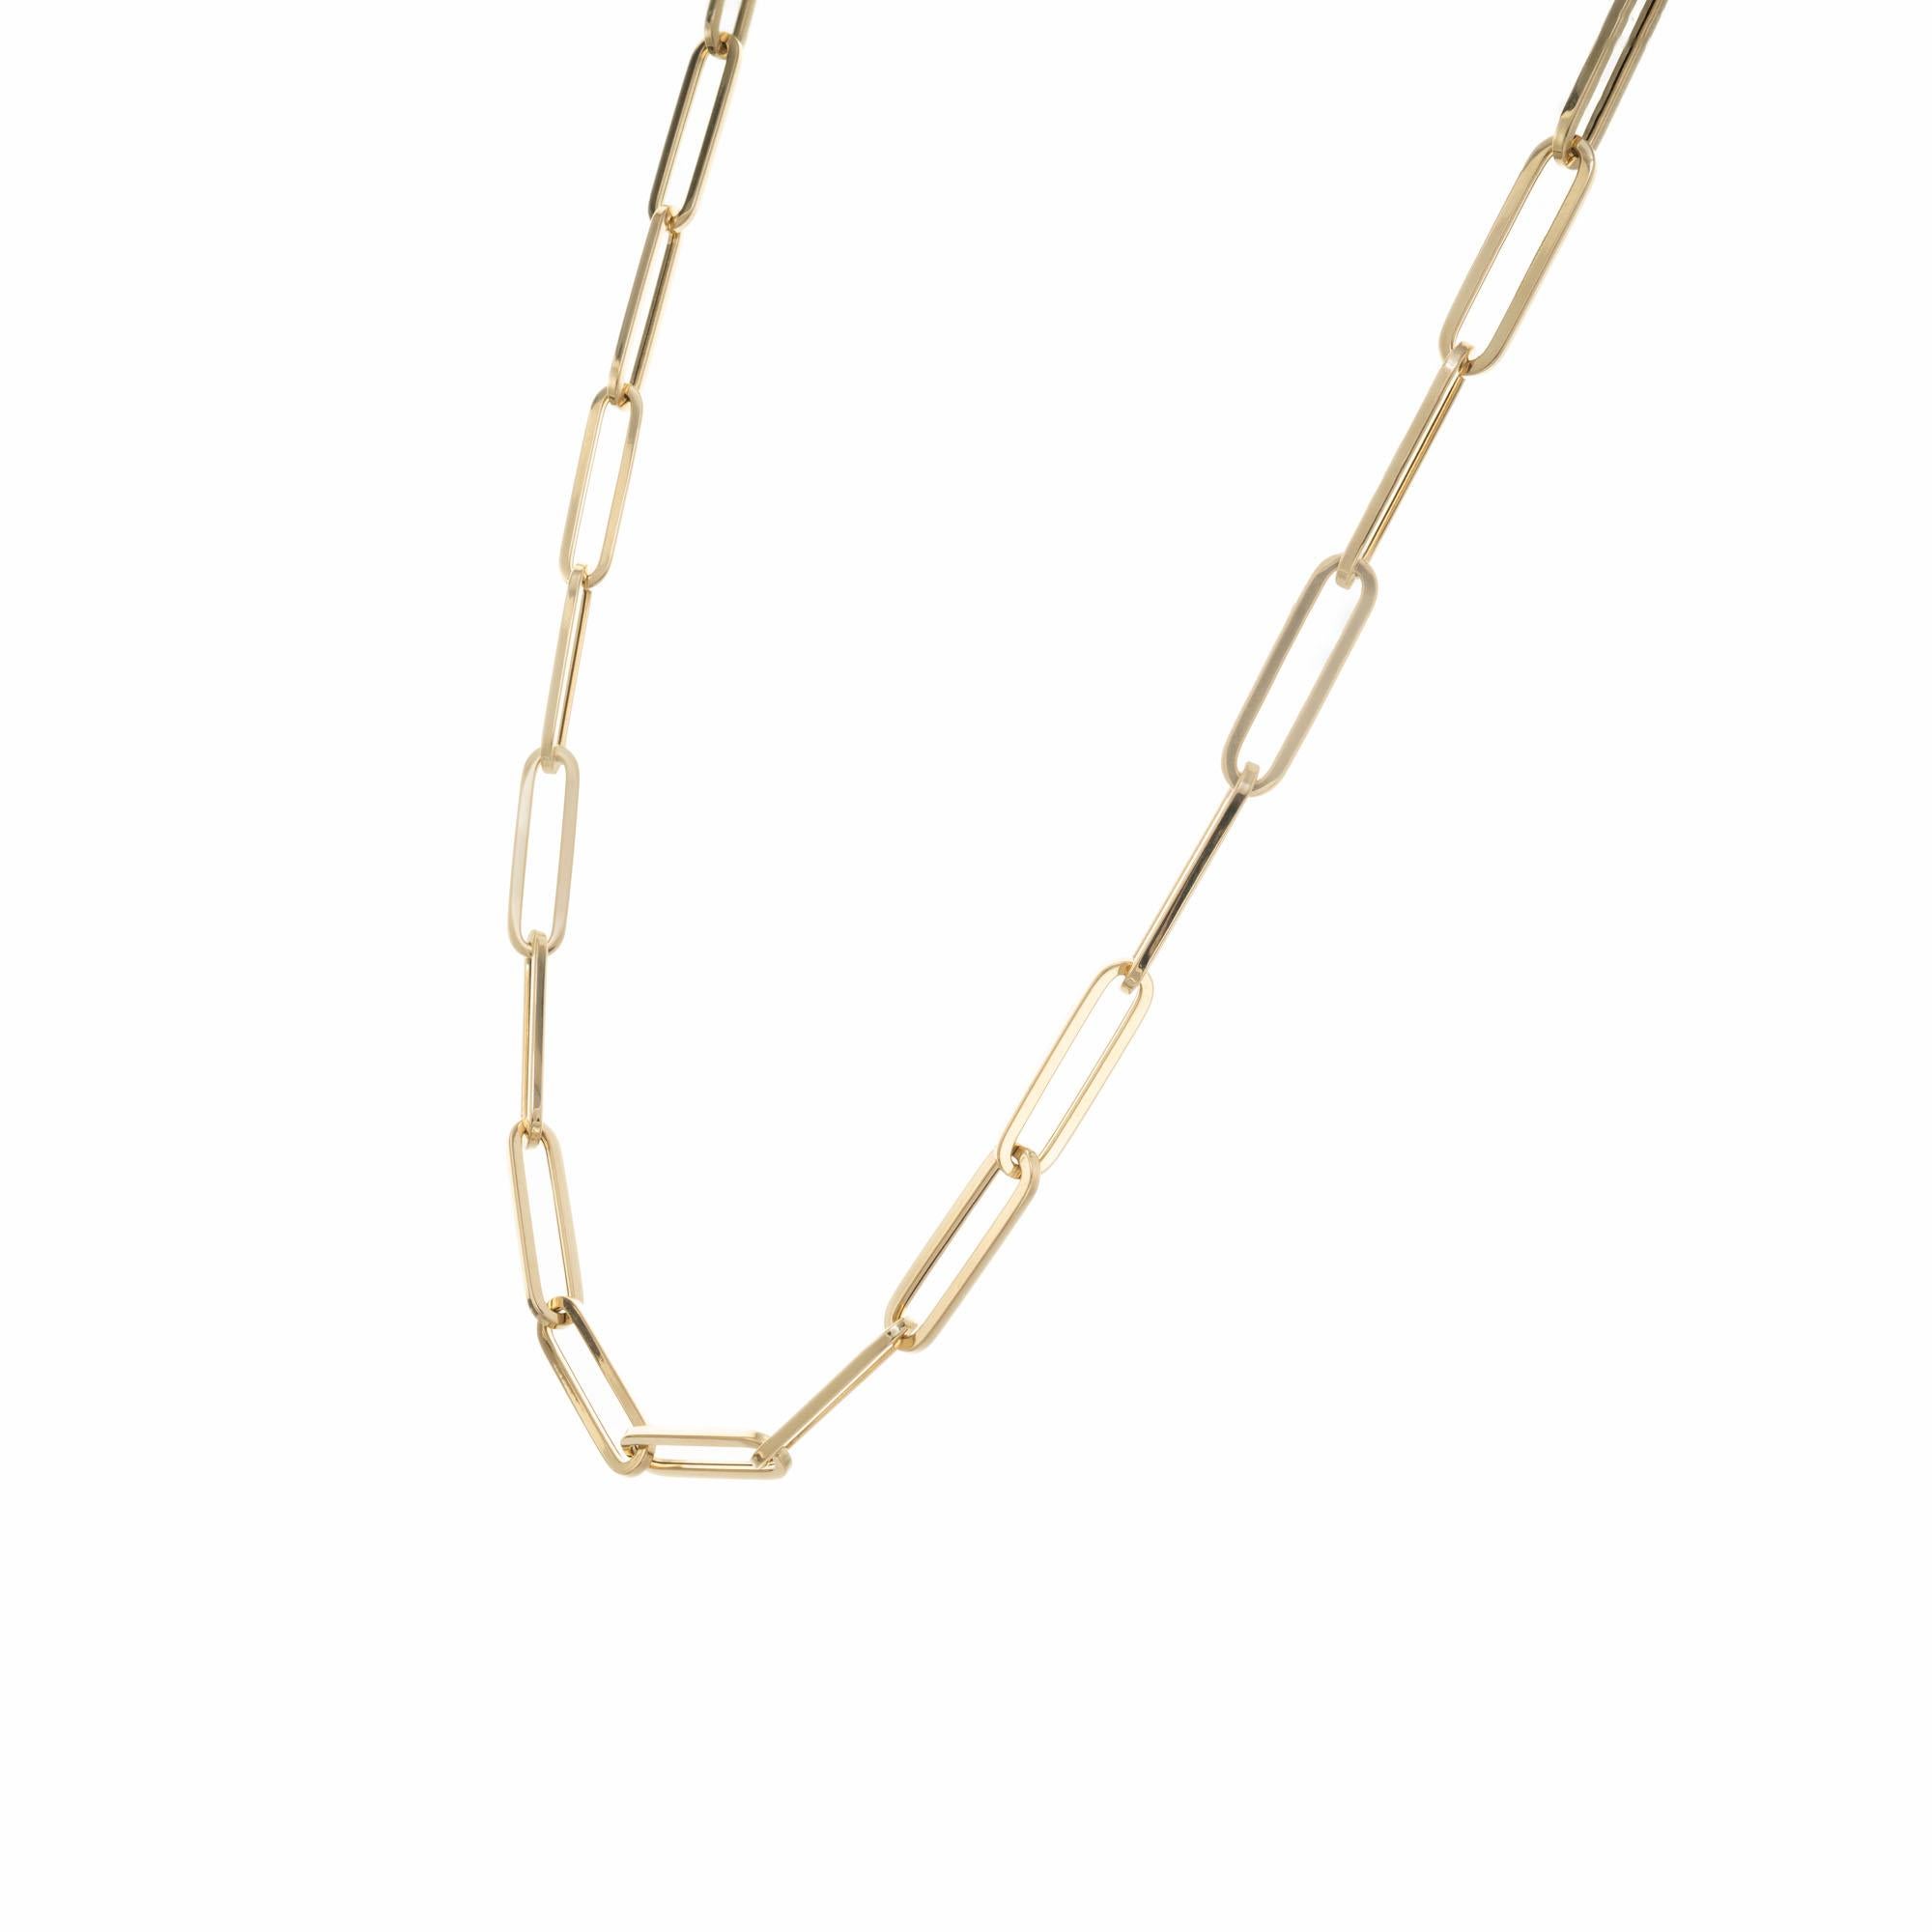 20 Inch 14k yellow gold elongated oval link chain. Made in Italy. 20 inches long. 

14k yellow gold 
Stamped: 14k Italy
12.4 grams
Total length: 20 Inches
Width: 5.85mm
Thickness/depth: 1.37mm

